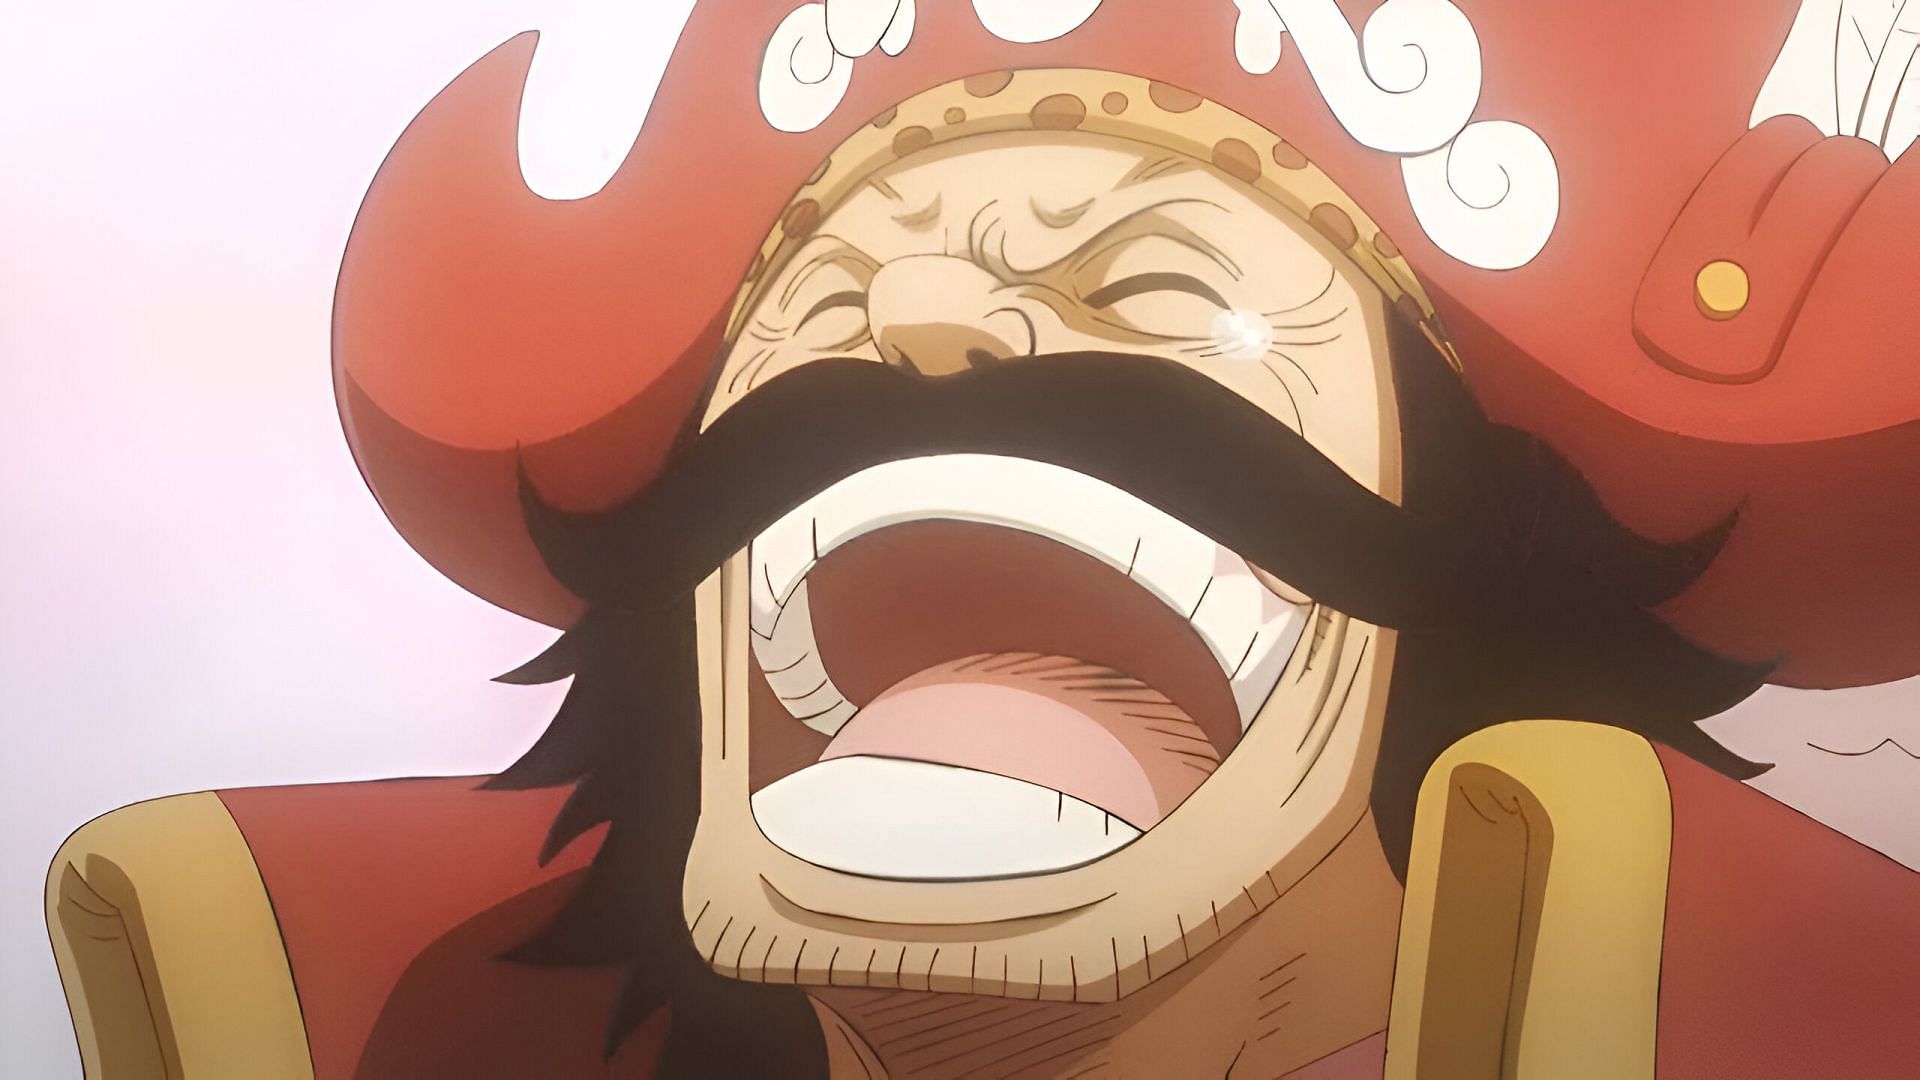 Chapter 1116 spoilers have One Piece fandom wholeheartedly bashing Gol D. Roger (Image via Toei Animation)